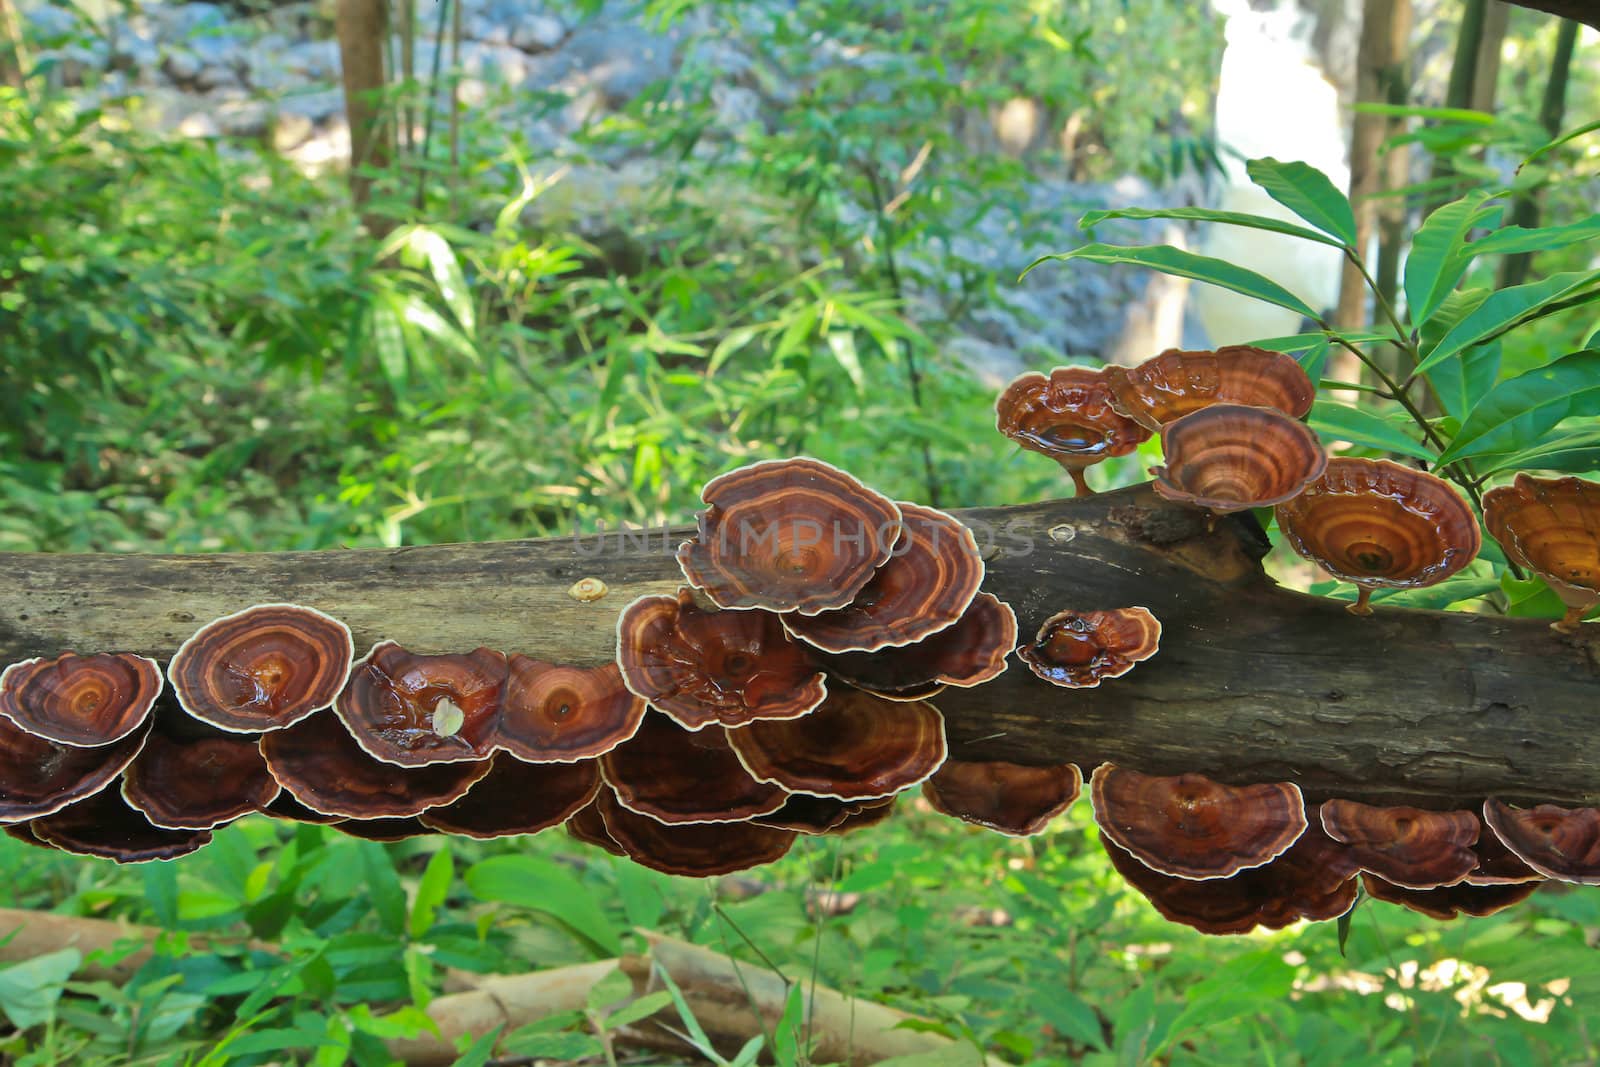 Mushrooms in the forest at Mae Hong Son province, Thailand by Photoguide